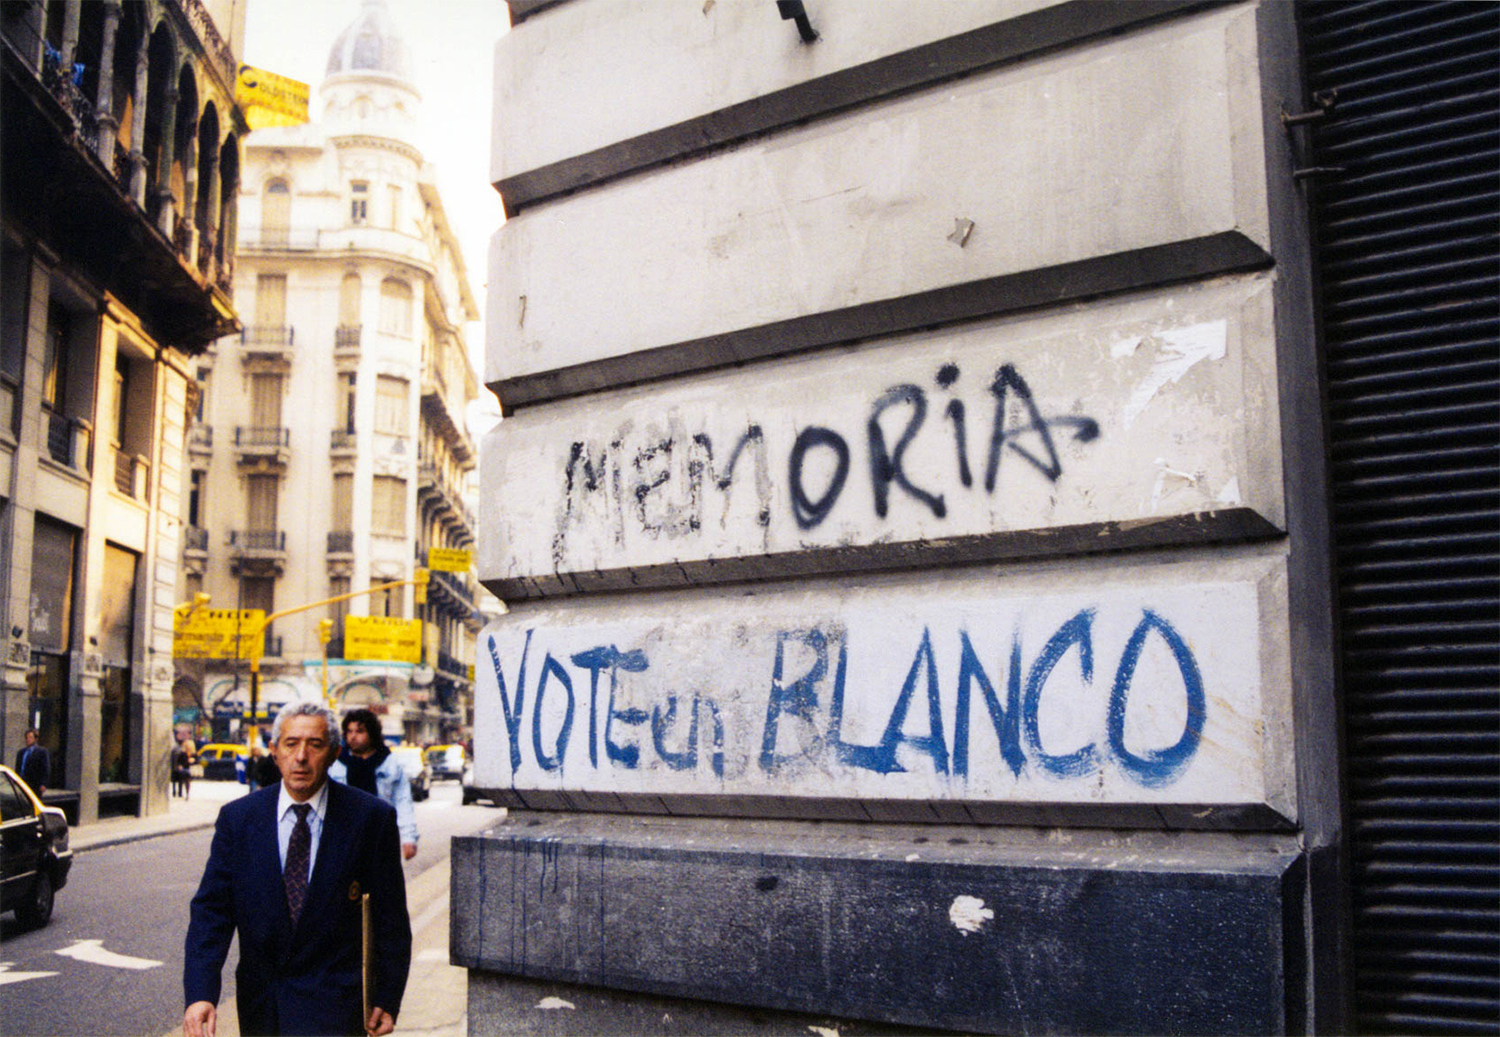 <p>'Memory' and 'vote blank' – two slogans summarising popular exasperation with the post-dictatorship Argentine political landscape. <br /></p>